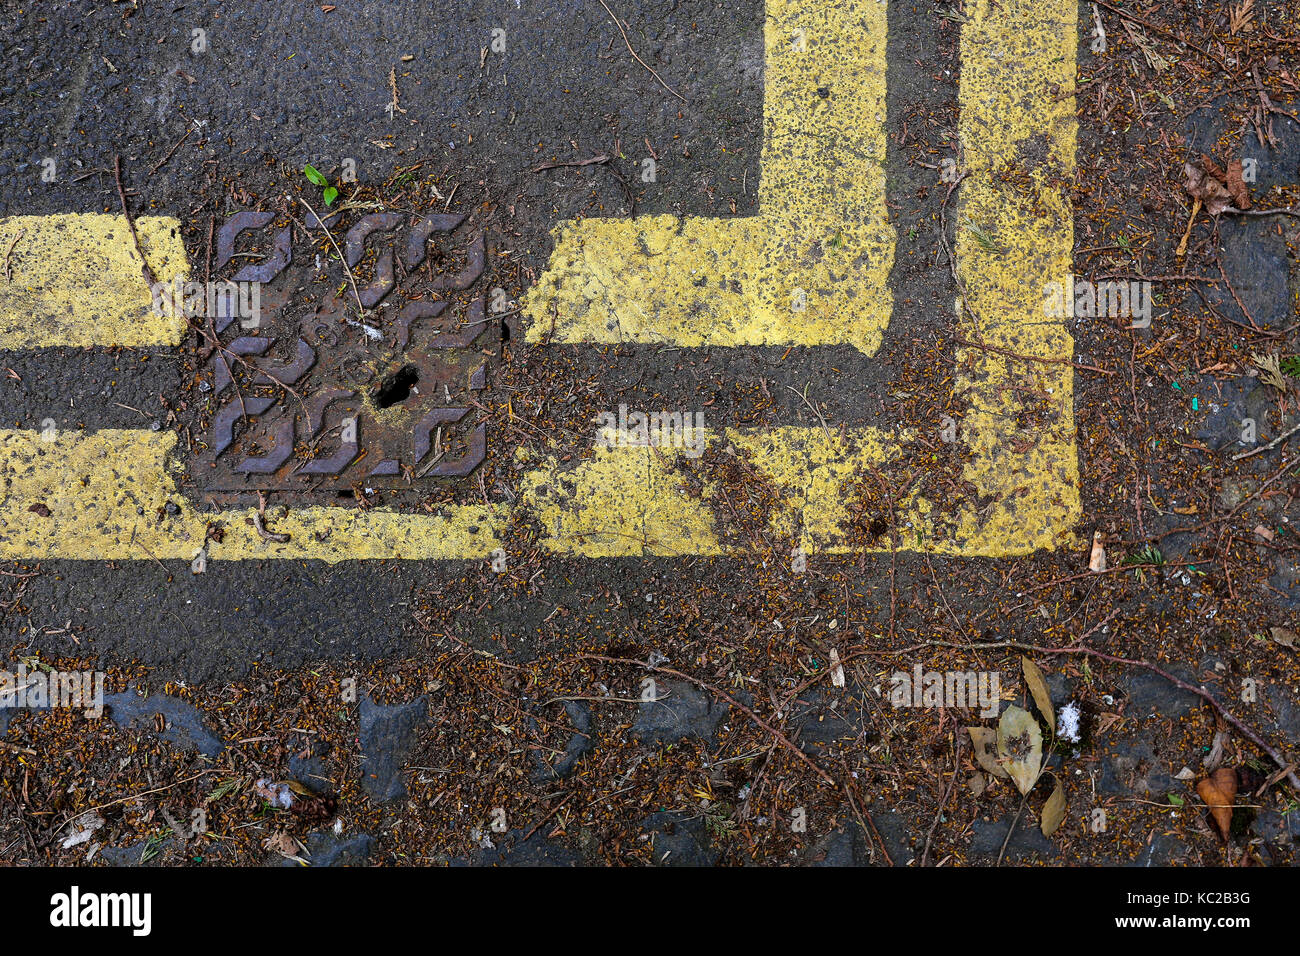 Sewer cover on road with double yellow lines full of leaf debris background Stock Photo